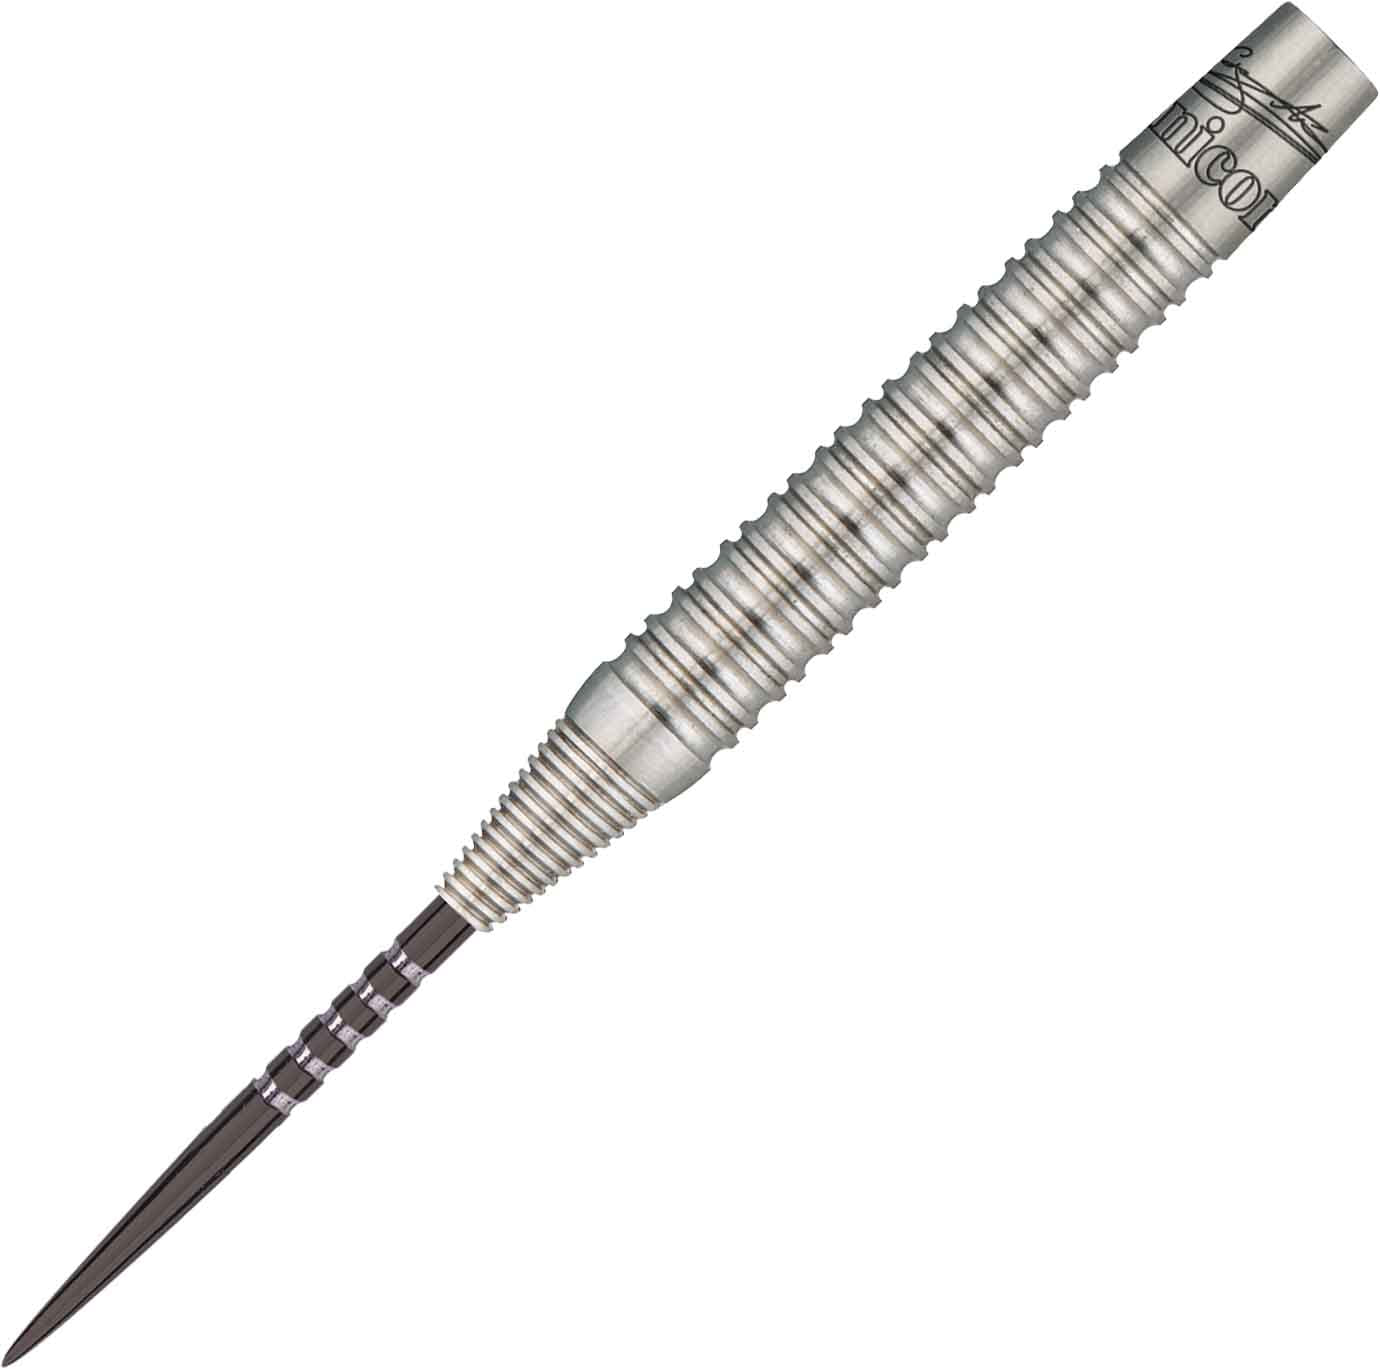 Unicorn Purist Gary Anderson Phase 4 Steel Tip Barrels Only - 23gm